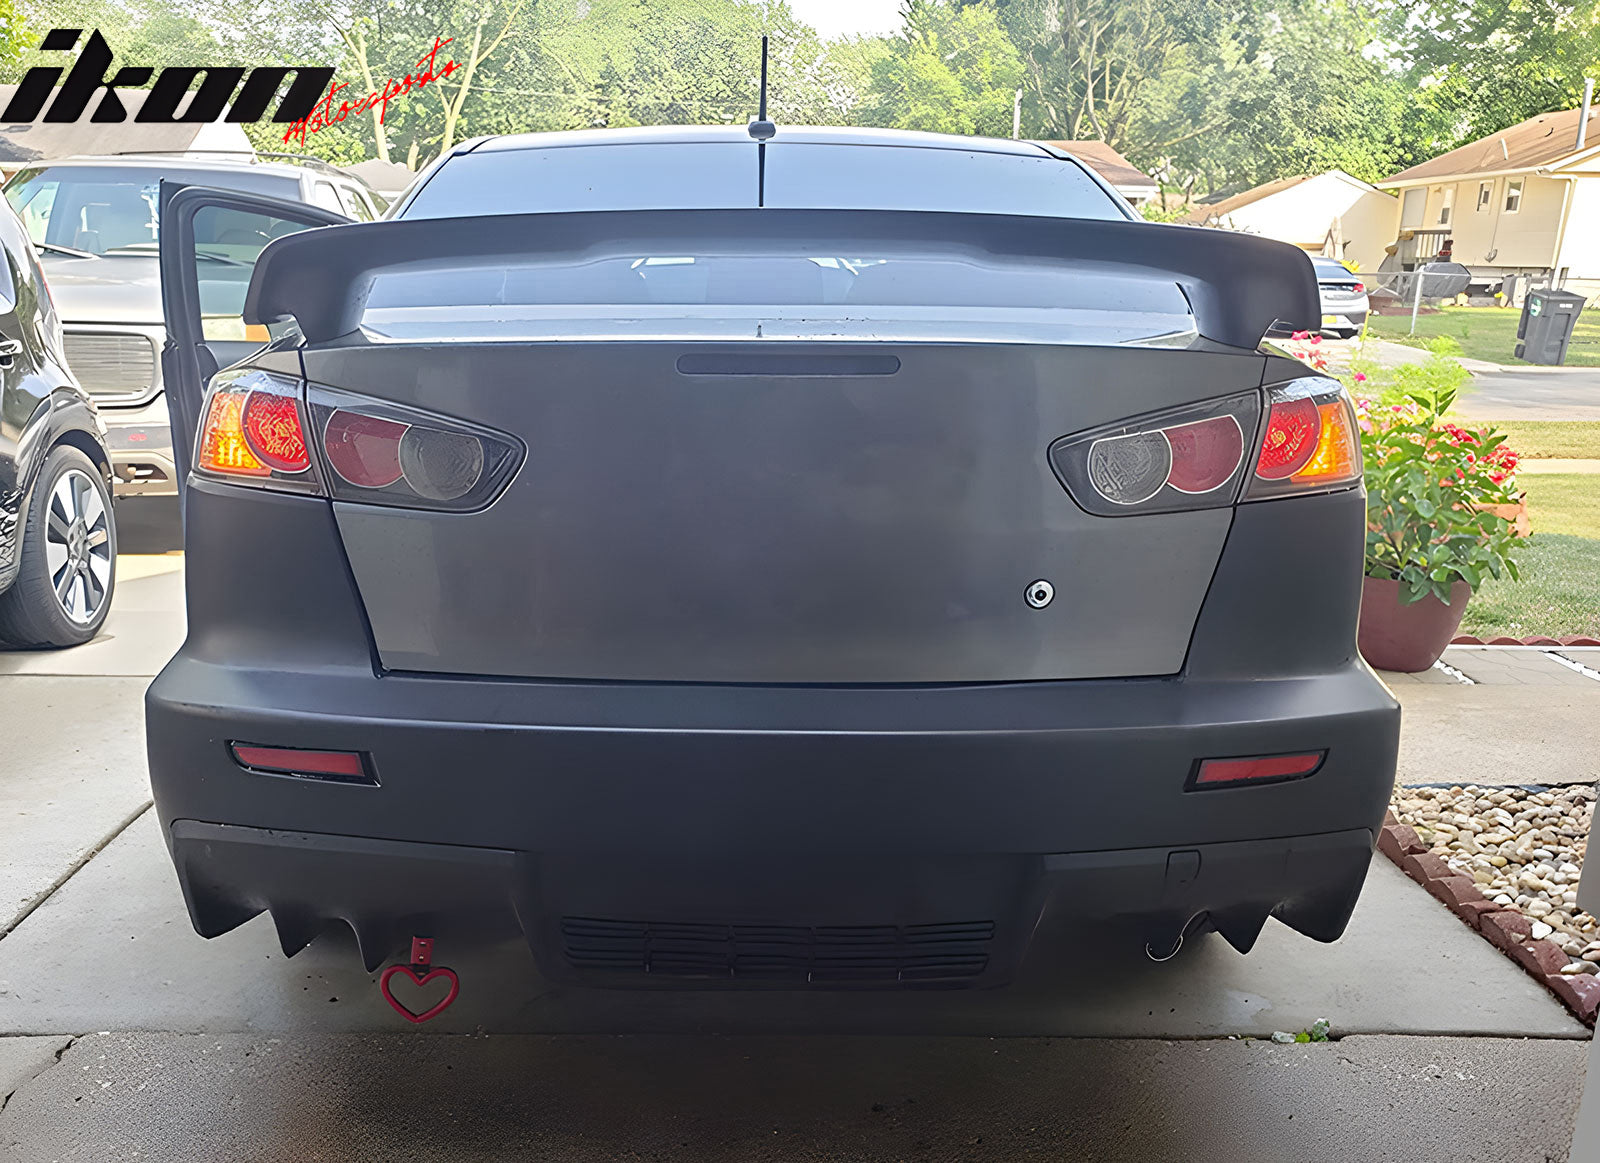 Rear Bumper Cover Compatible With 2008-2015 MITSUBISHI LANCER, EVO Style PP Rear Bumper Conversion Guard Protector Added On Bodykit by IKON MOTORSPORTS, 2009 2010 2011 2012 2013 2014